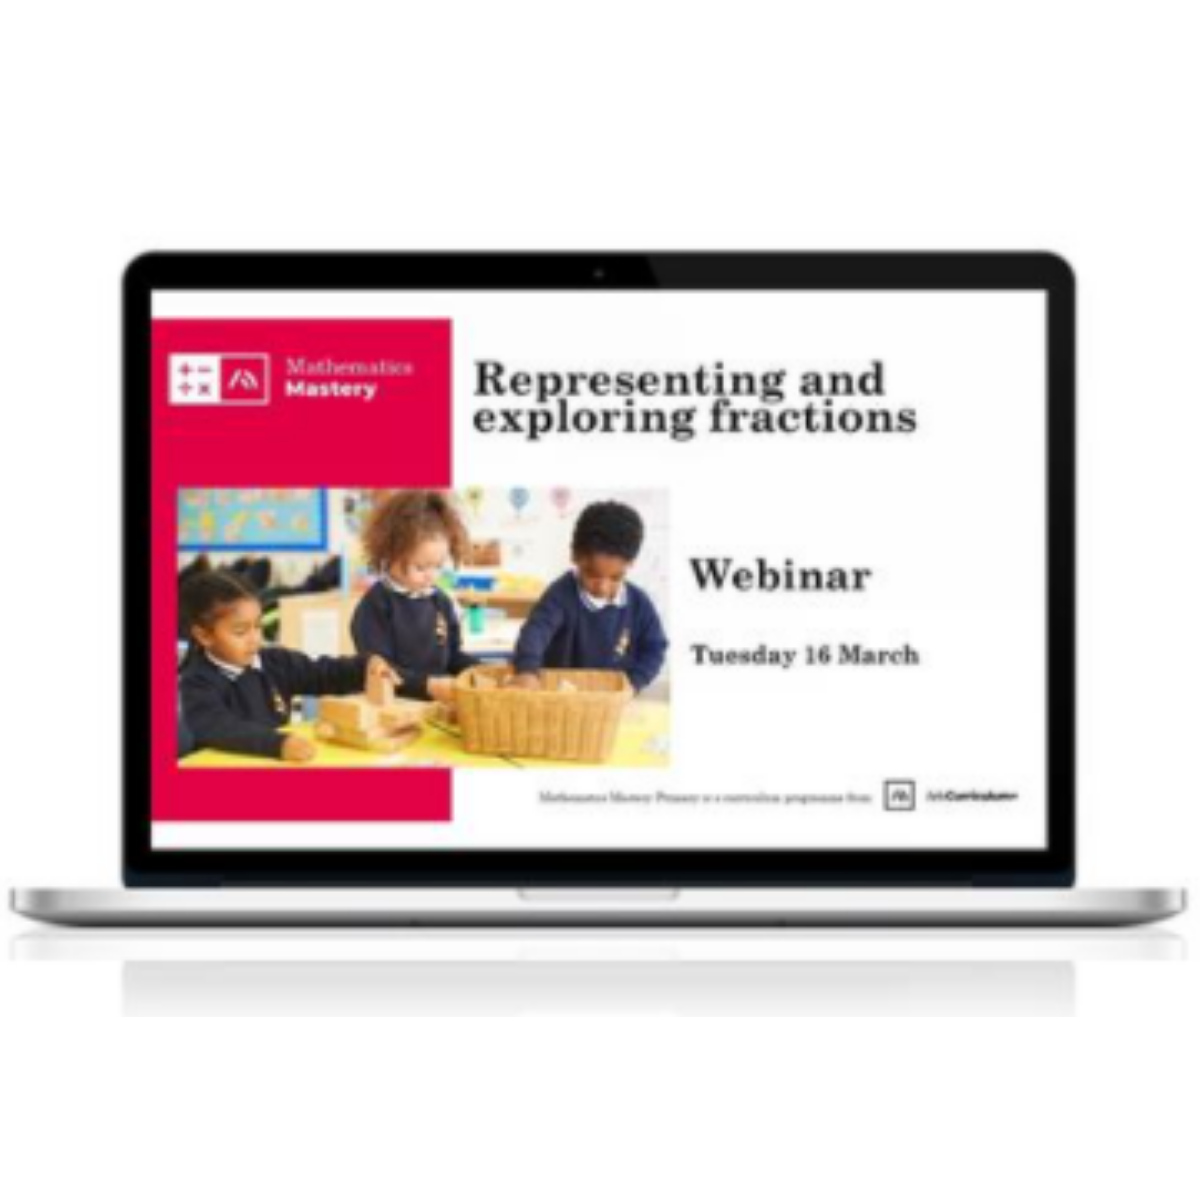 Watch our webinar: Representing and exploring fractions with Mathematics Mastery​